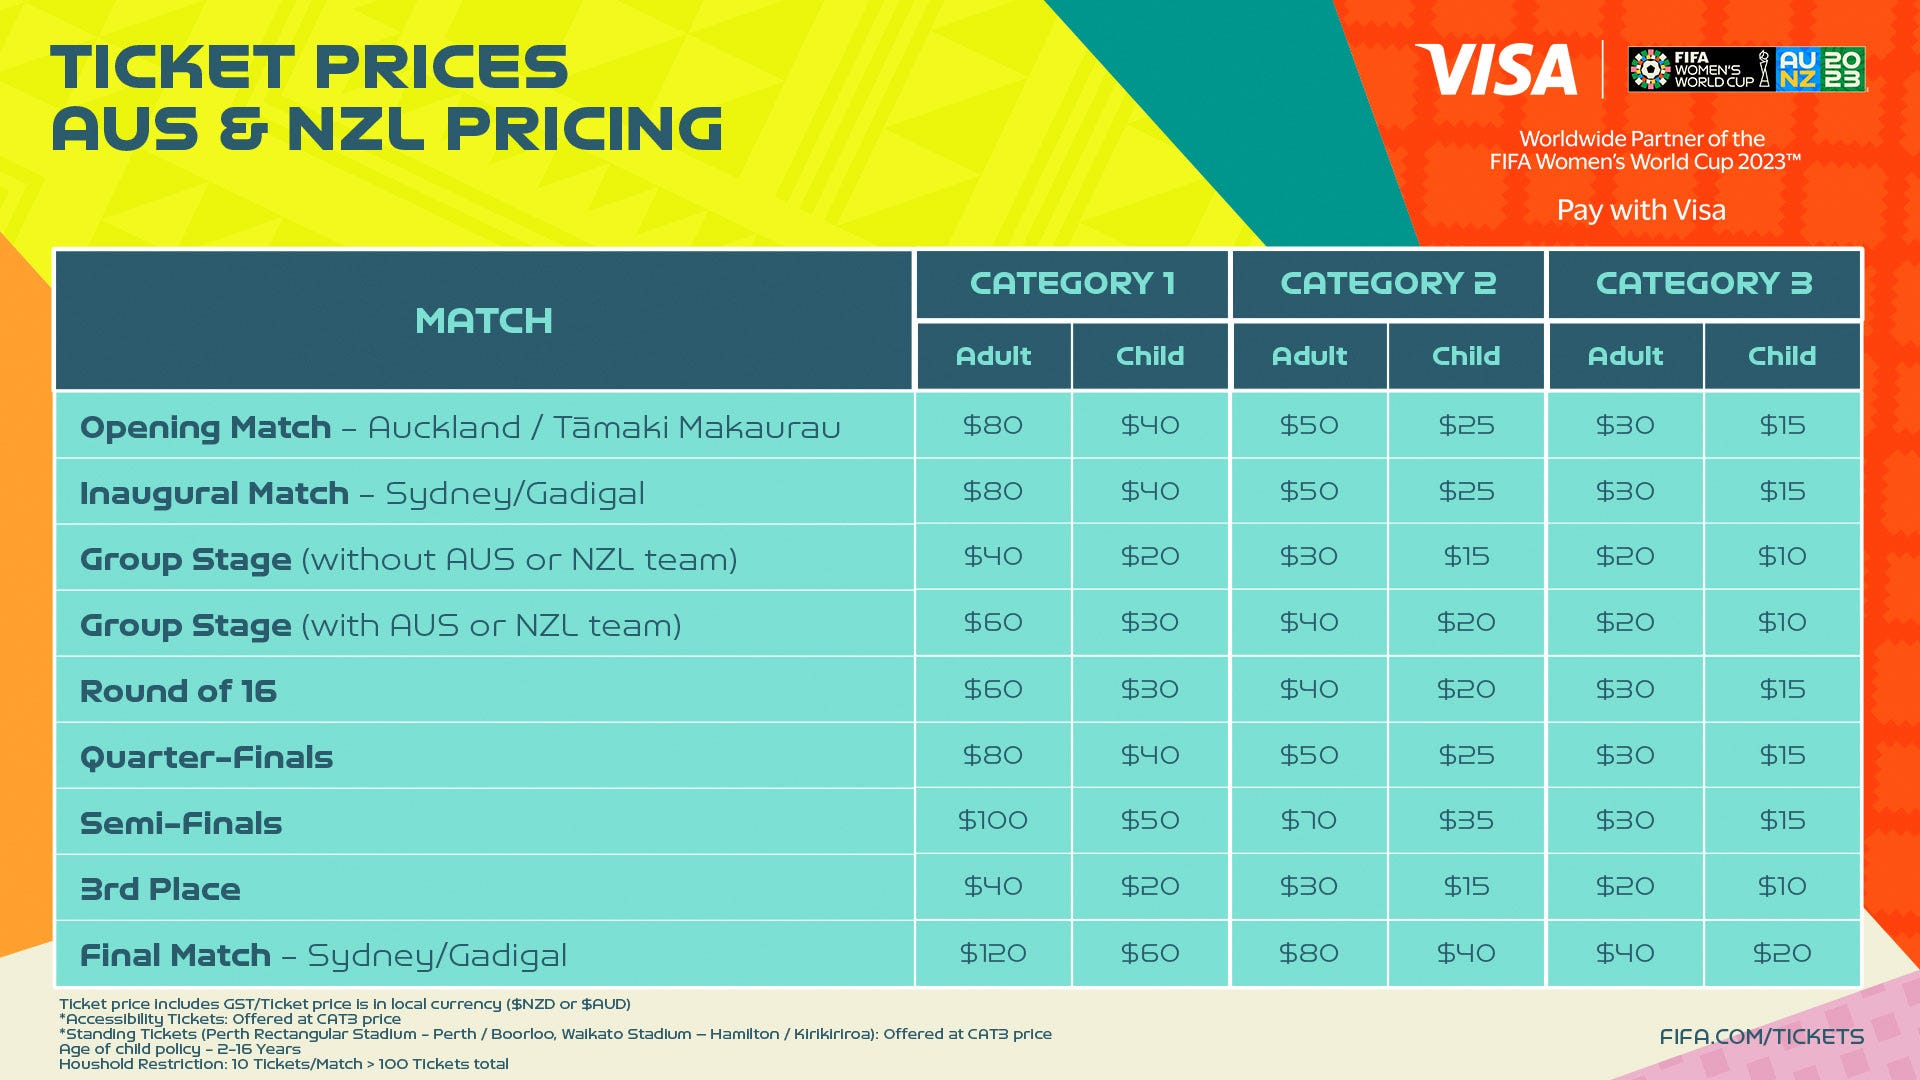 Women's World Cup 2023 ticket prices